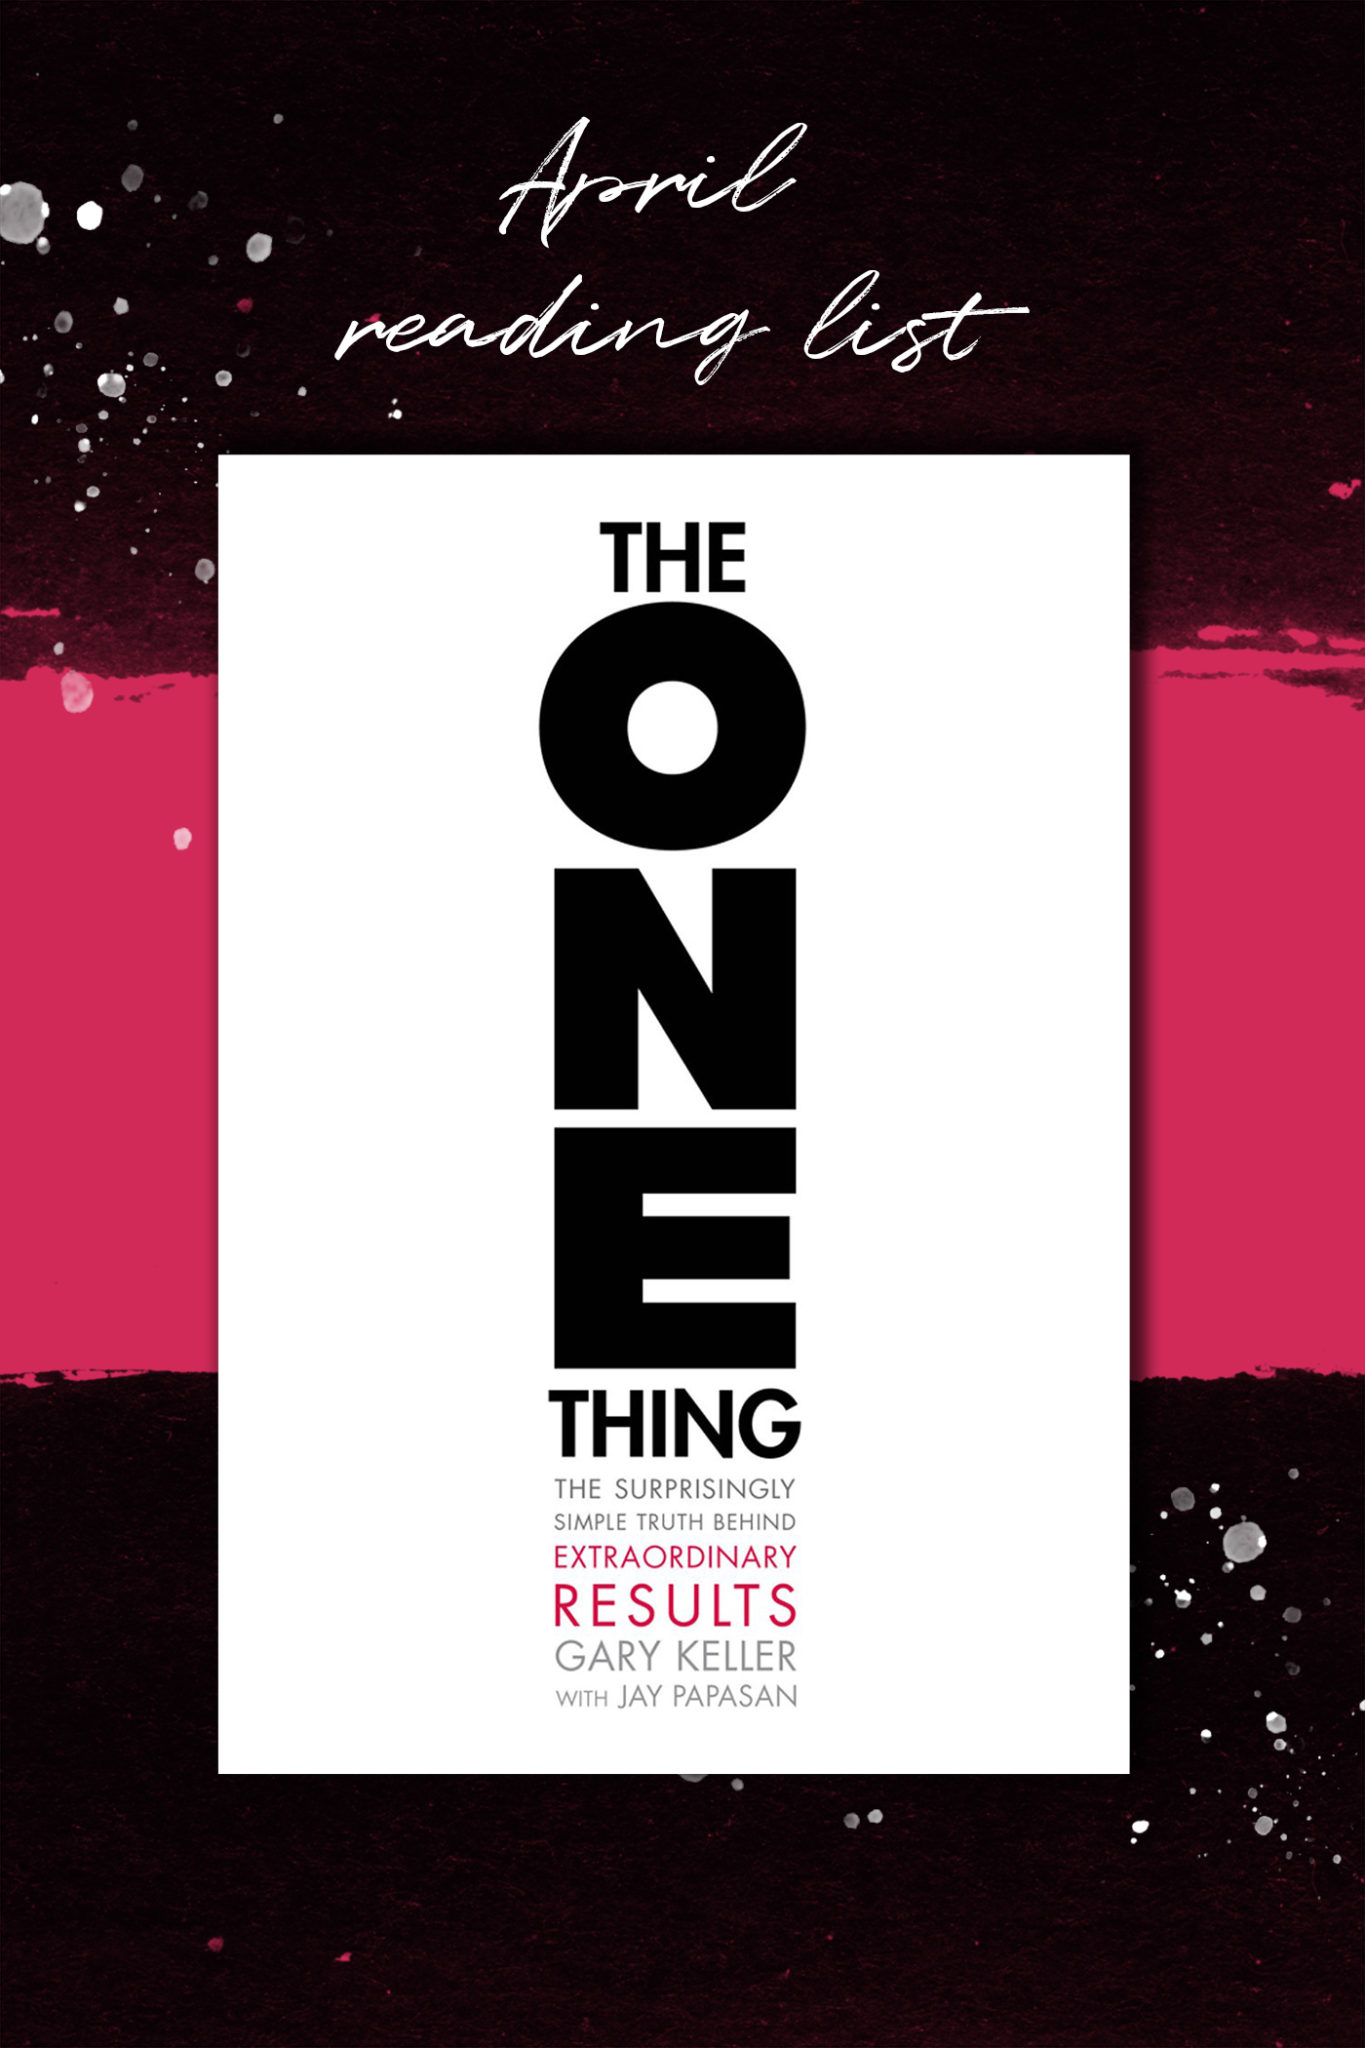 April 2020 Reading List - The One Thing by Gary Keller review